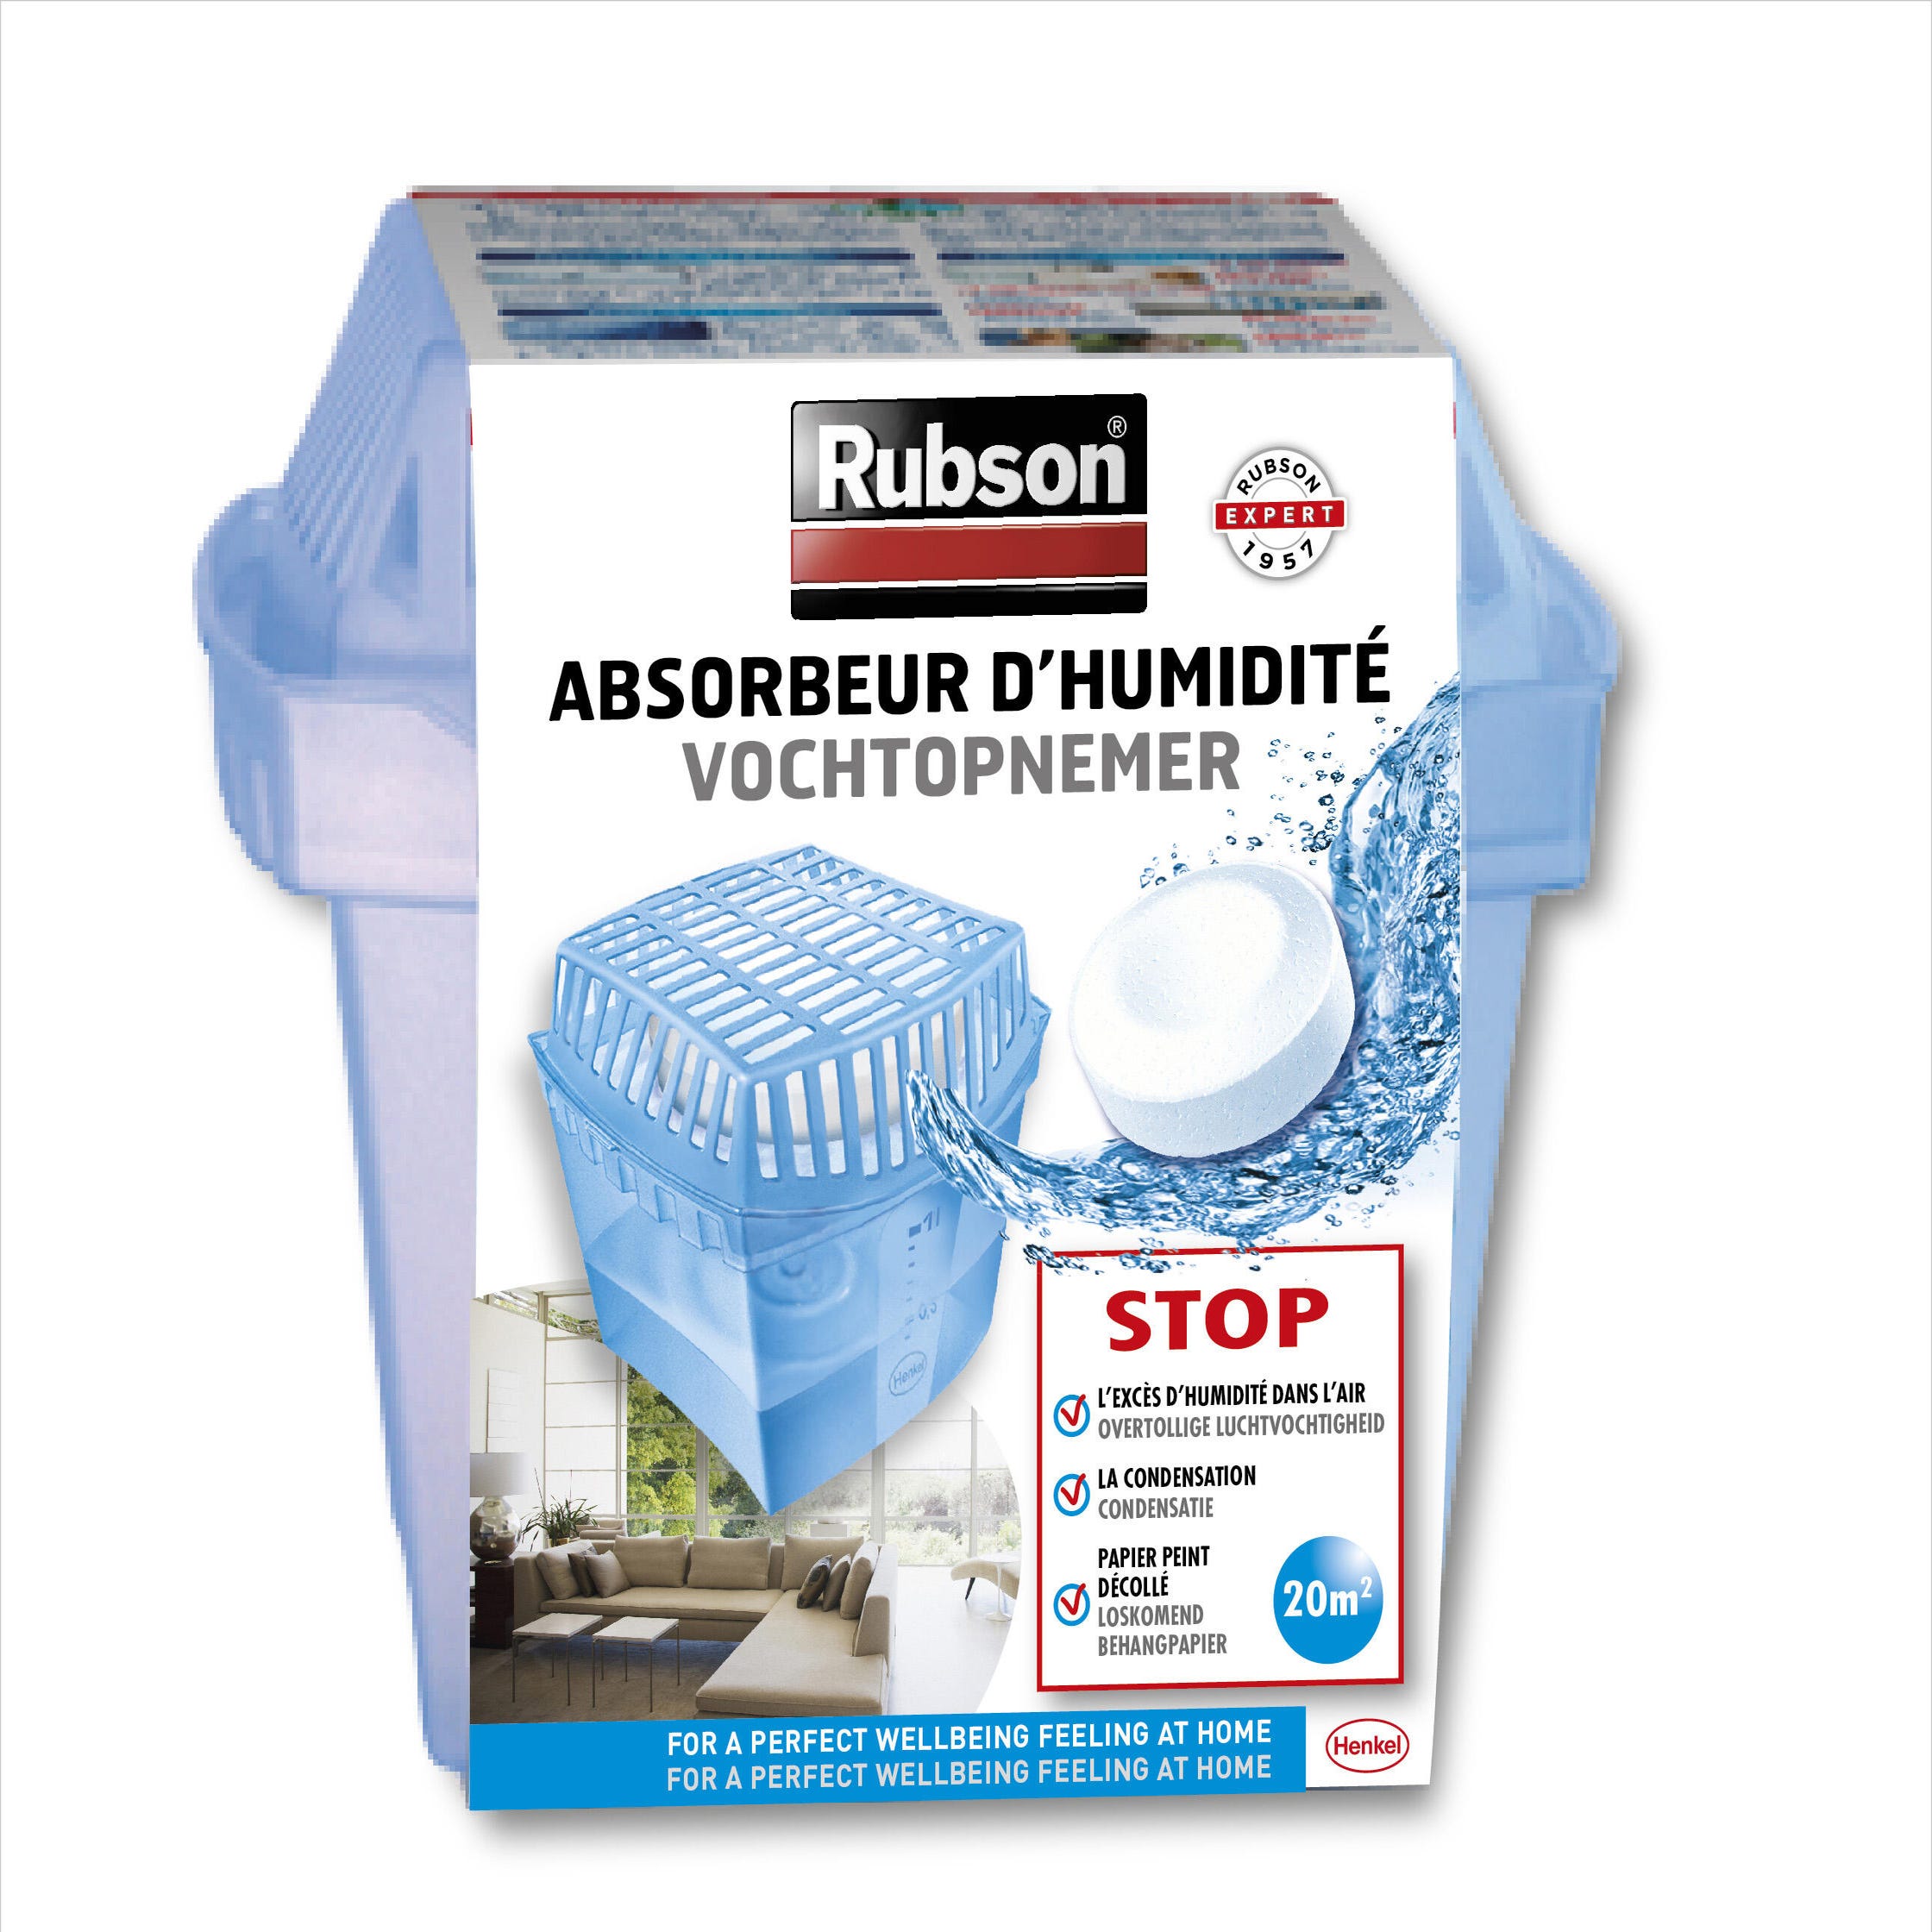 Recharge absorbeur humidité Aero 360° pure x4 - RUBSON - Cdiscount Bricolage